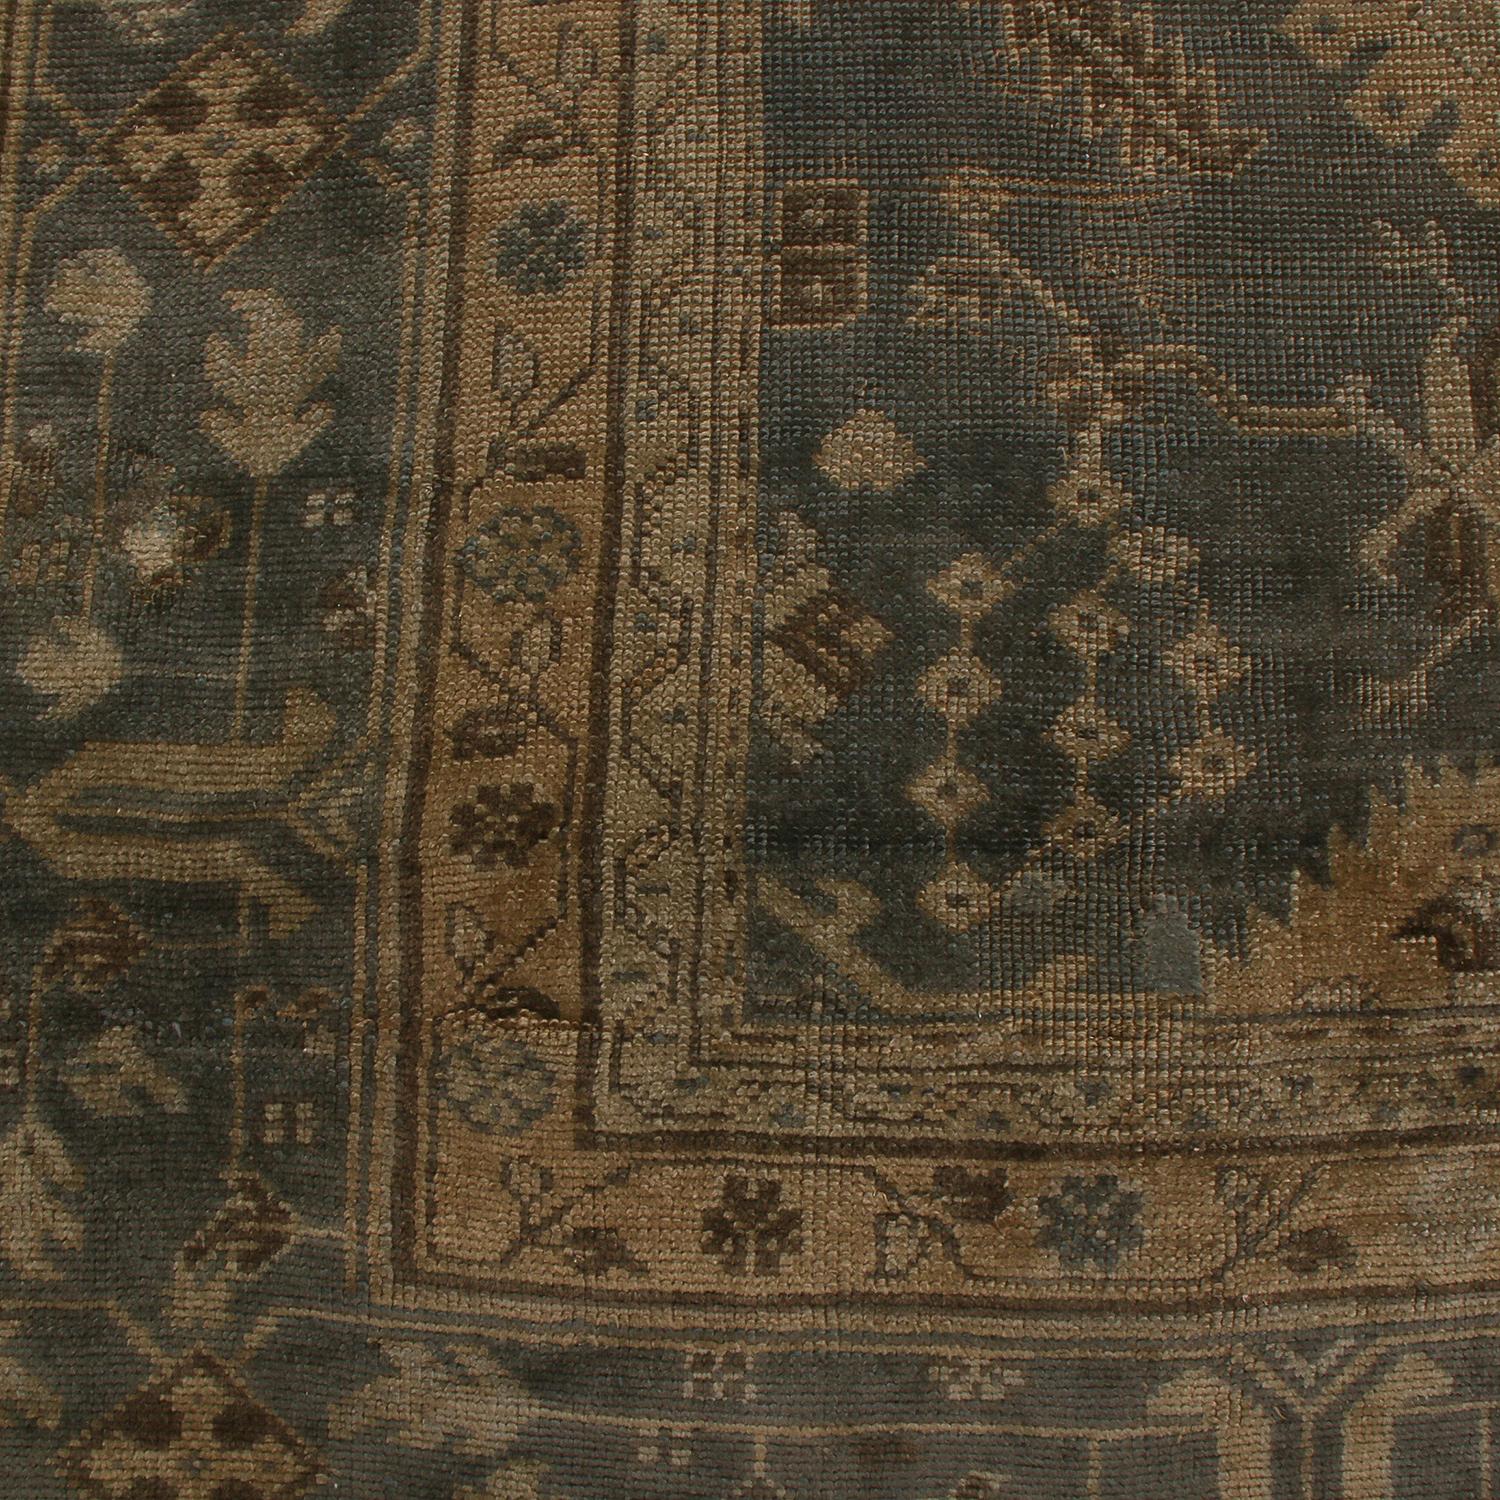 Turkish Antique Oushak Rug in Slate with Beige Floral Patterns, from Rug & Kilim For Sale